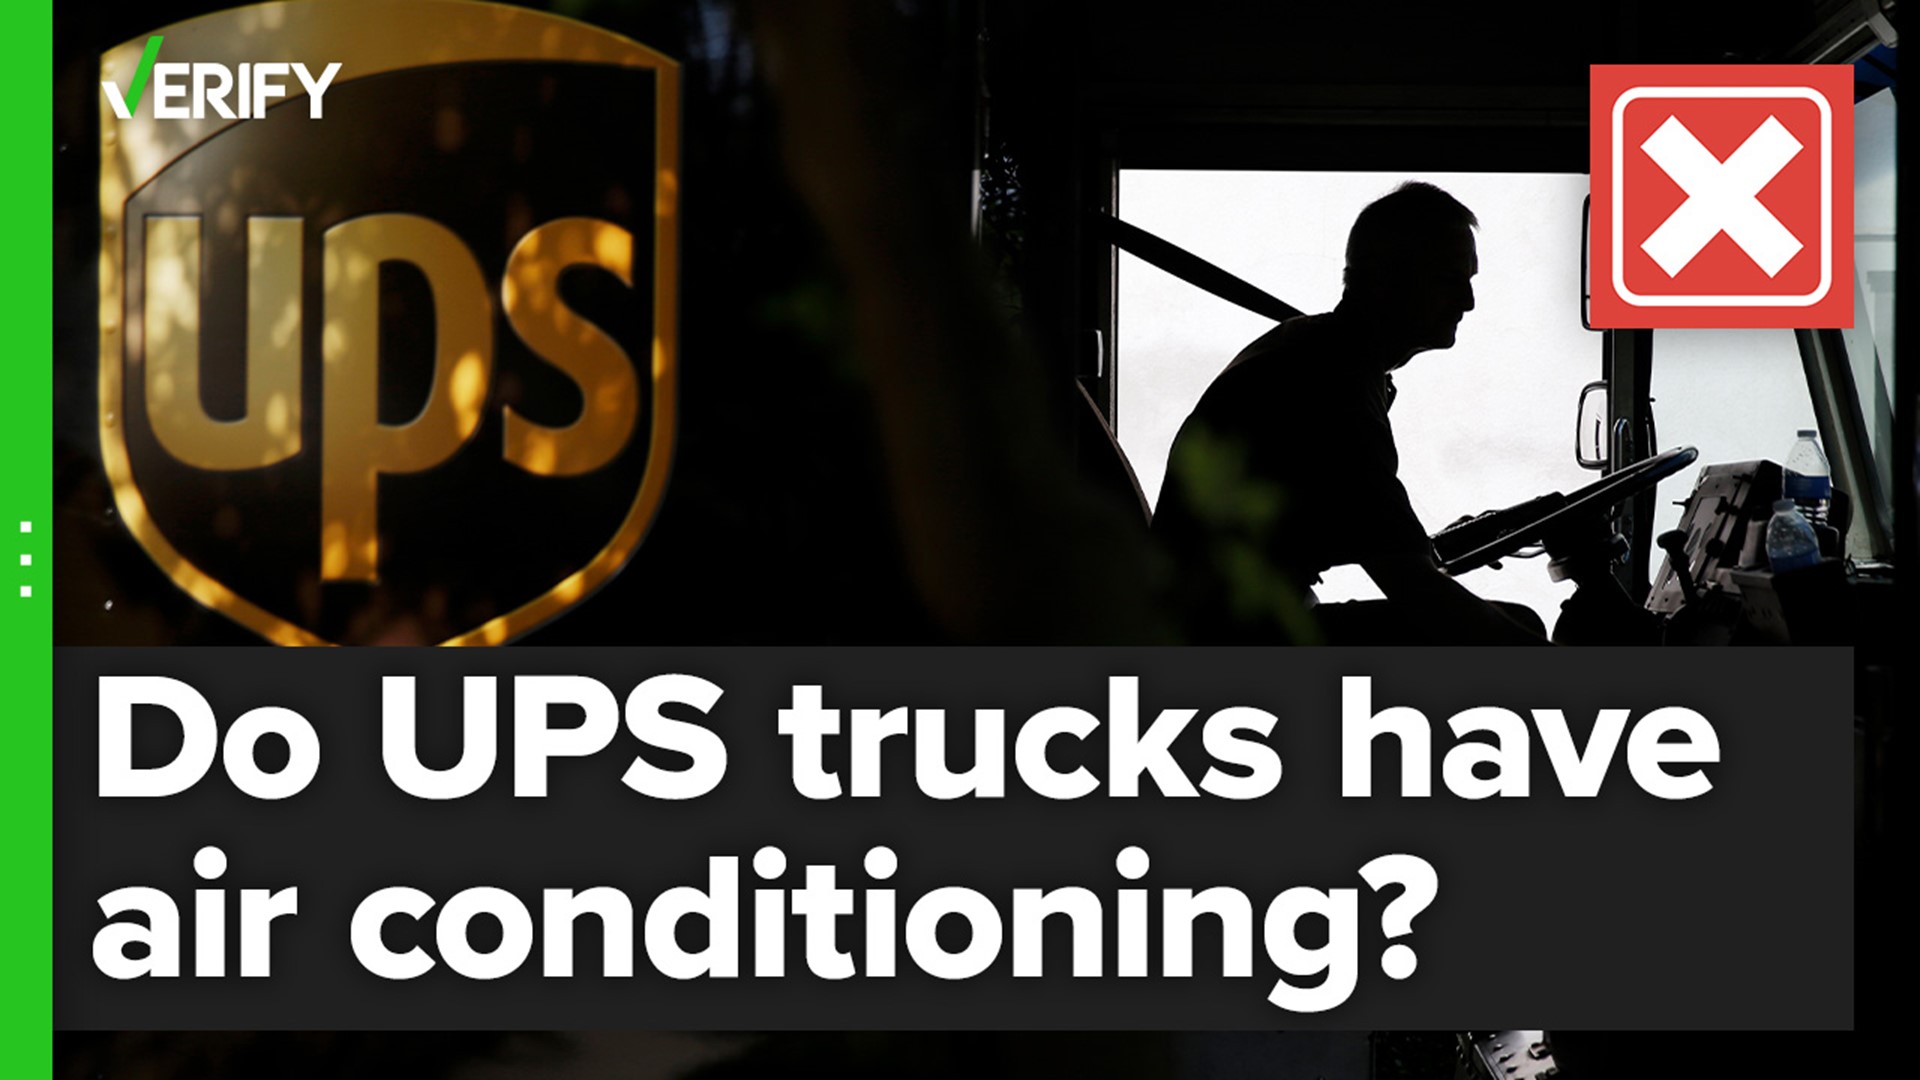 The Teamsters, the labor union representing UPS workers, is urging the company to protect drivers after multiple reports of heat-related incidents this summer.